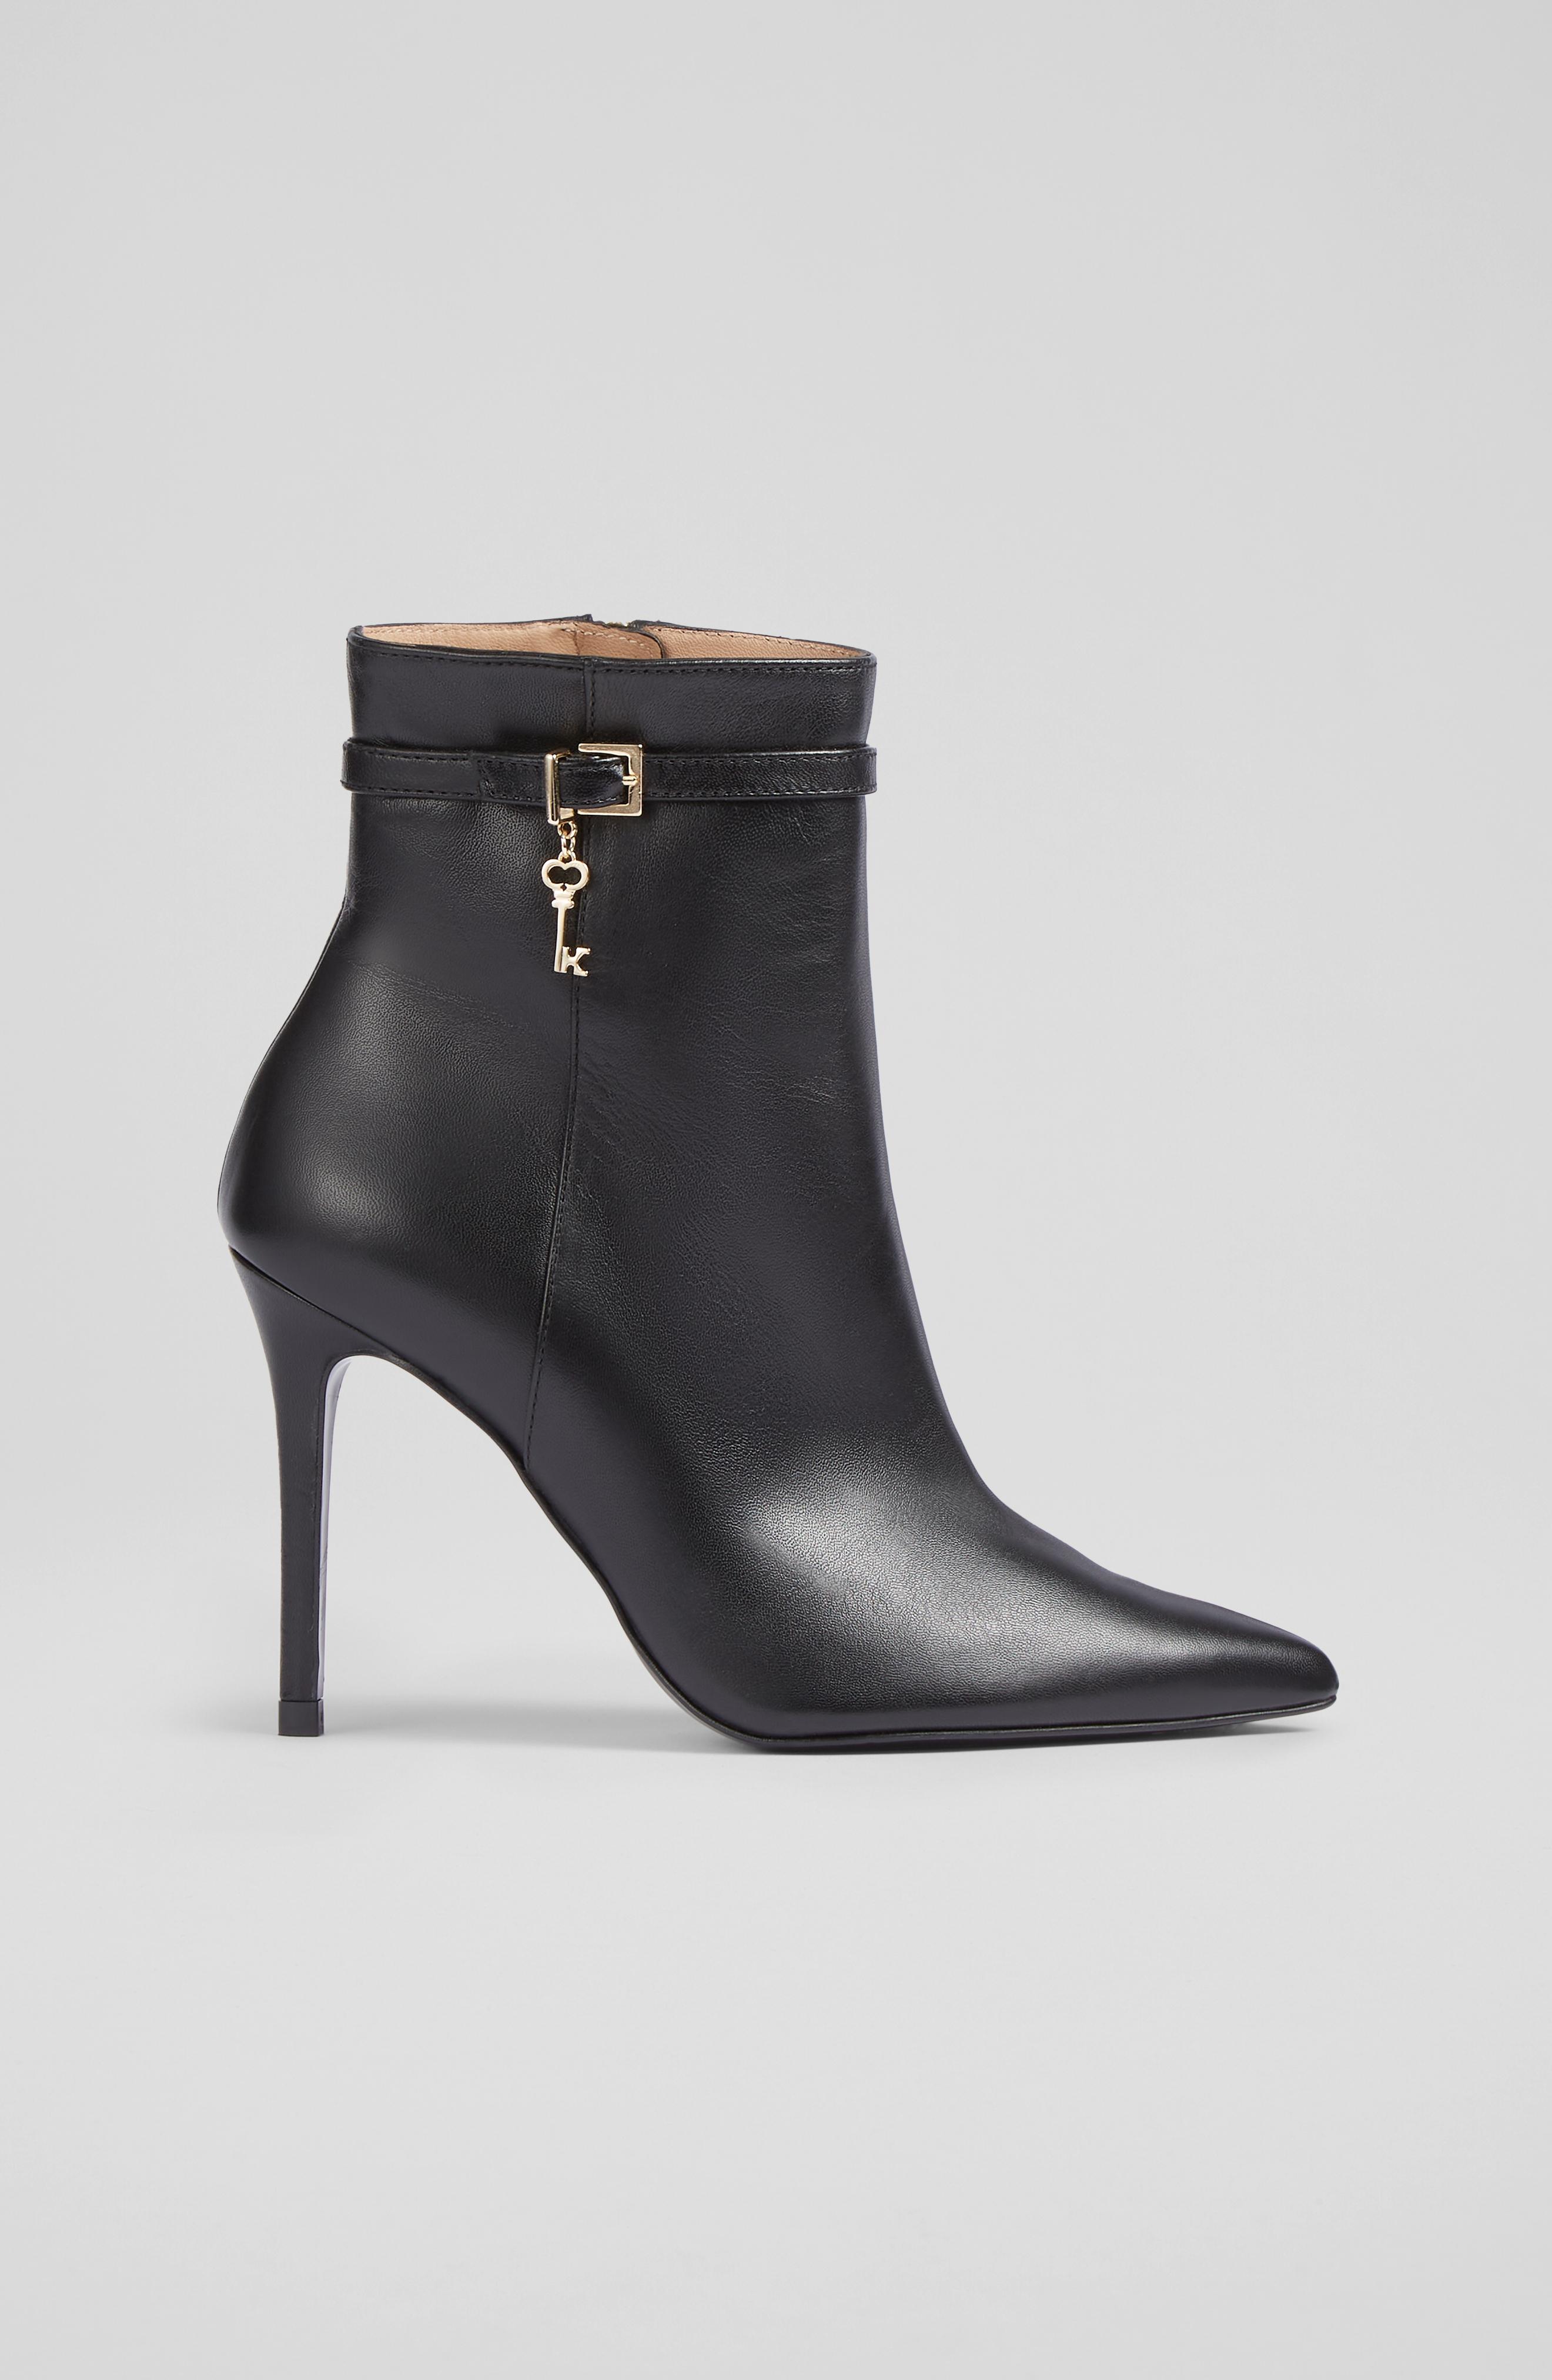 Clover Black Leather Ankle Boots, Black